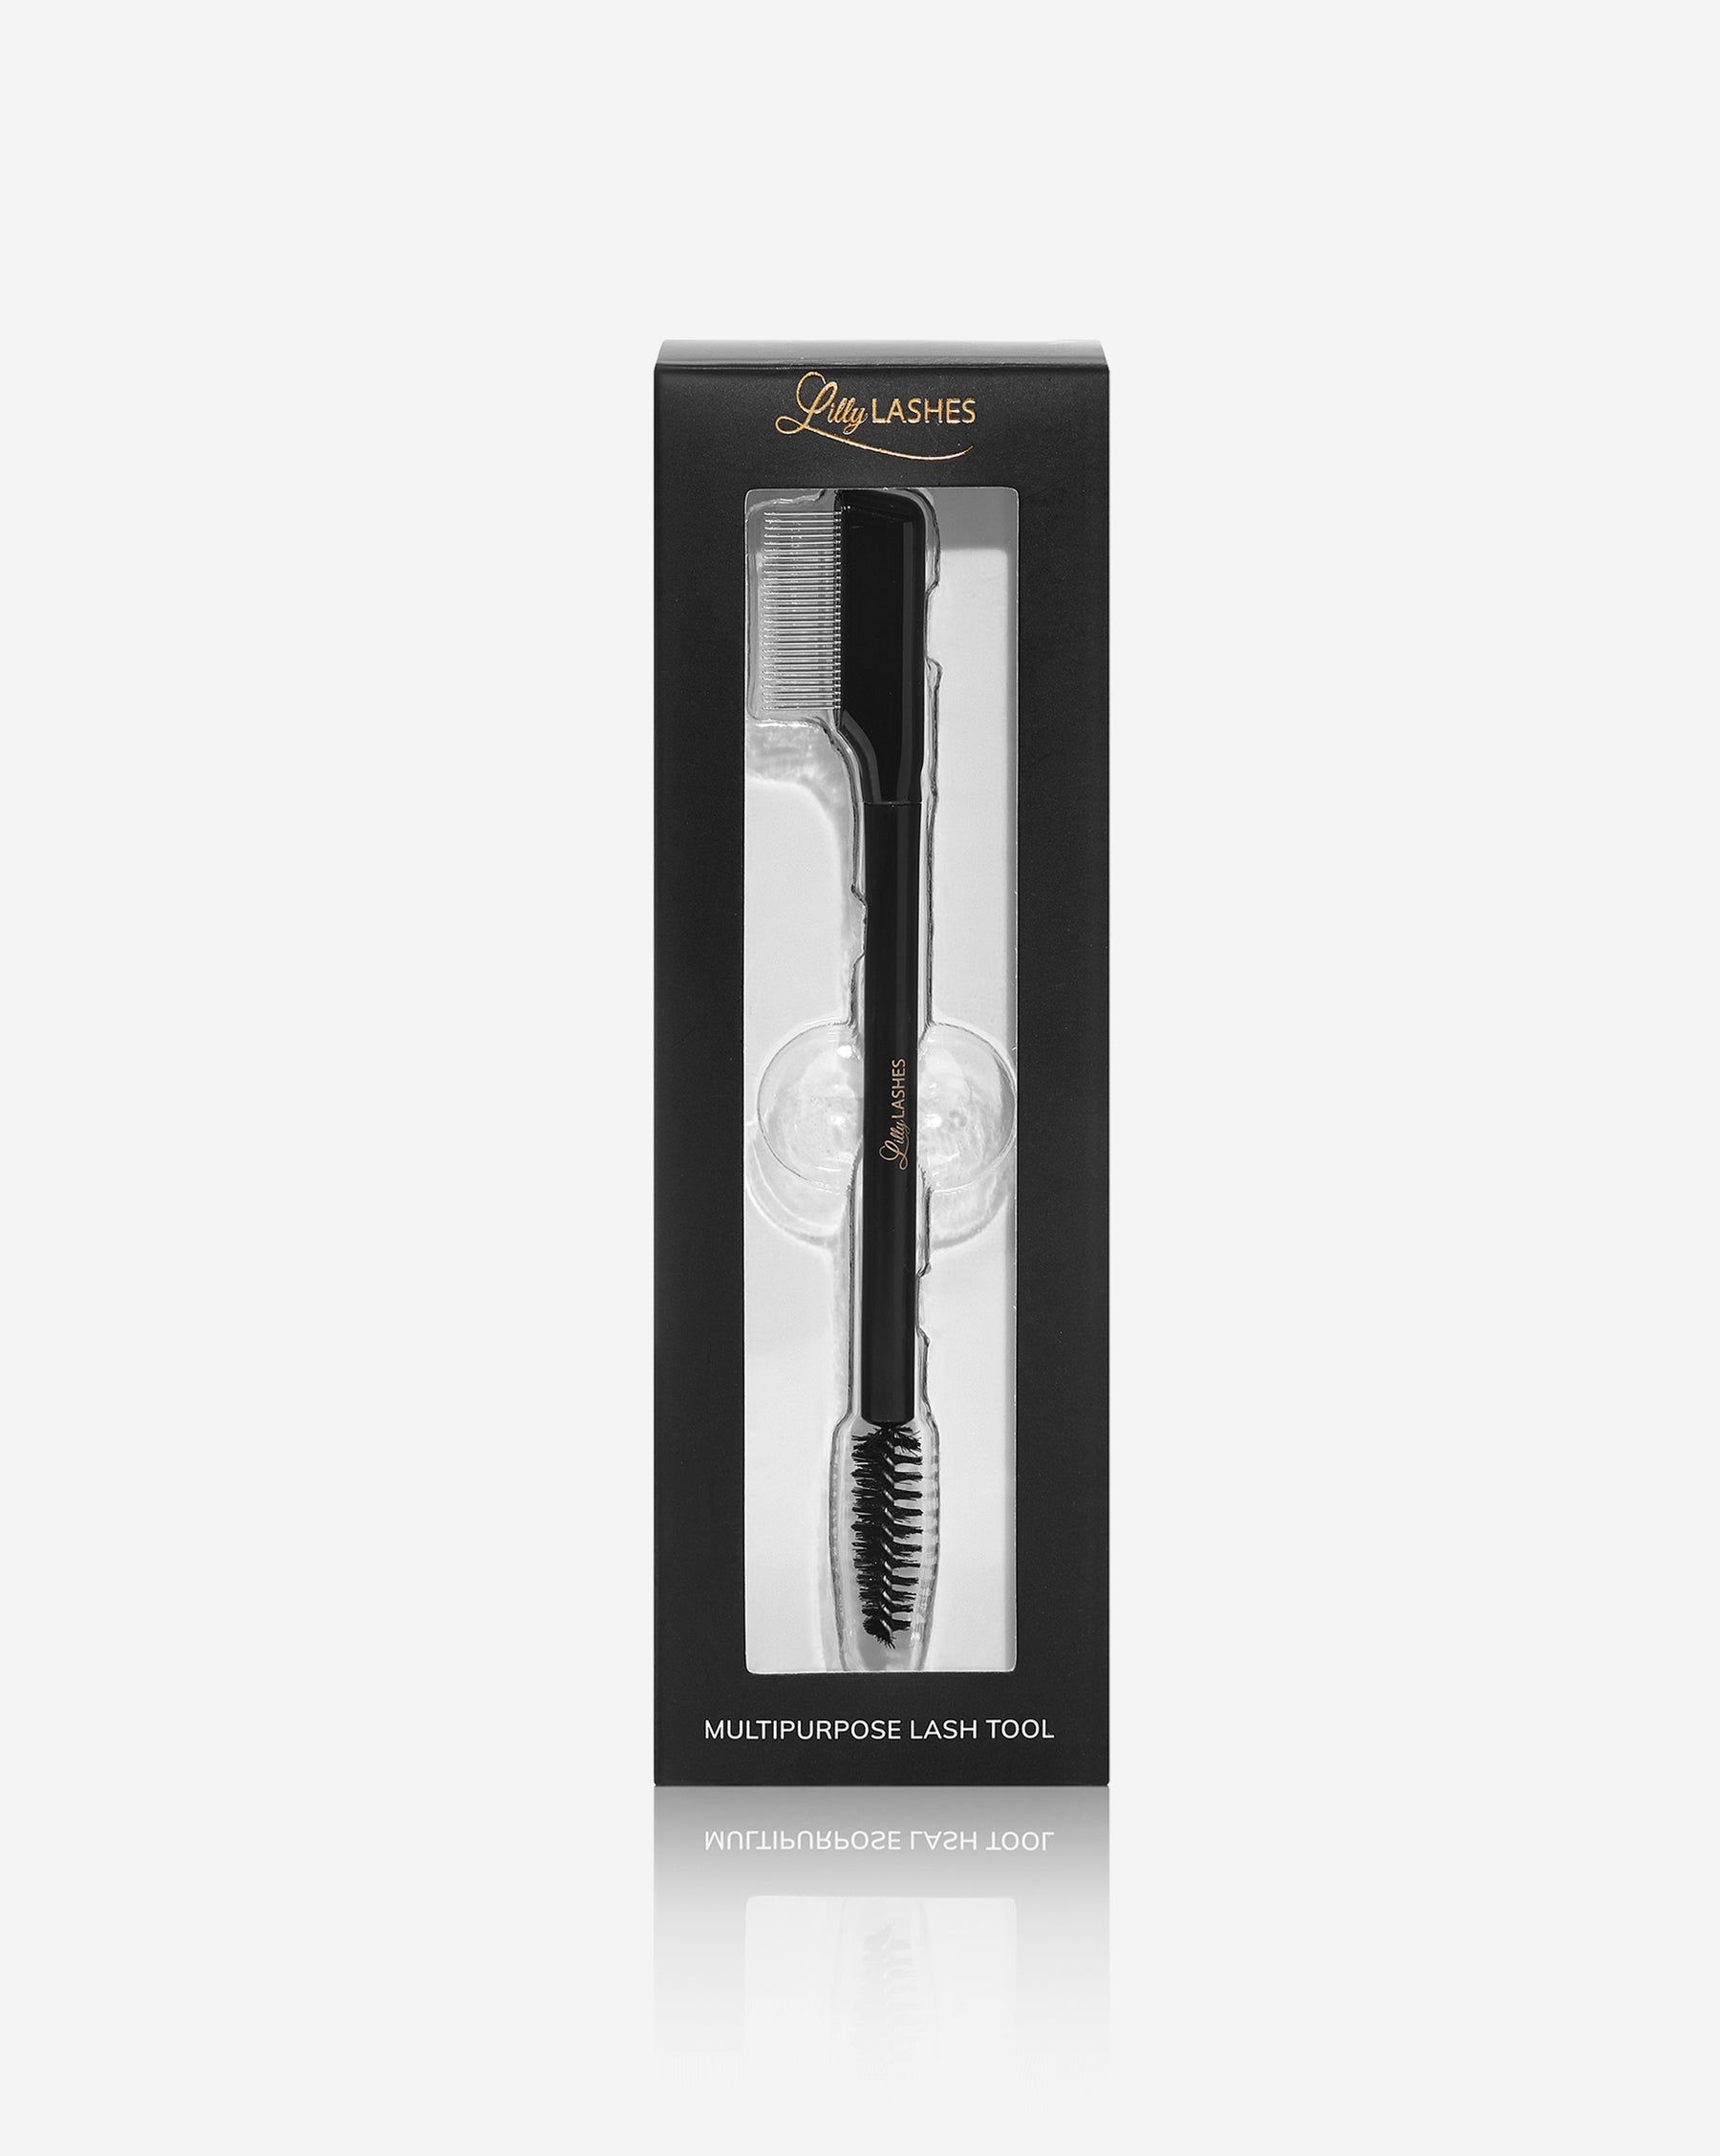 2-in-1 Lash Tool | Lilly Lashes